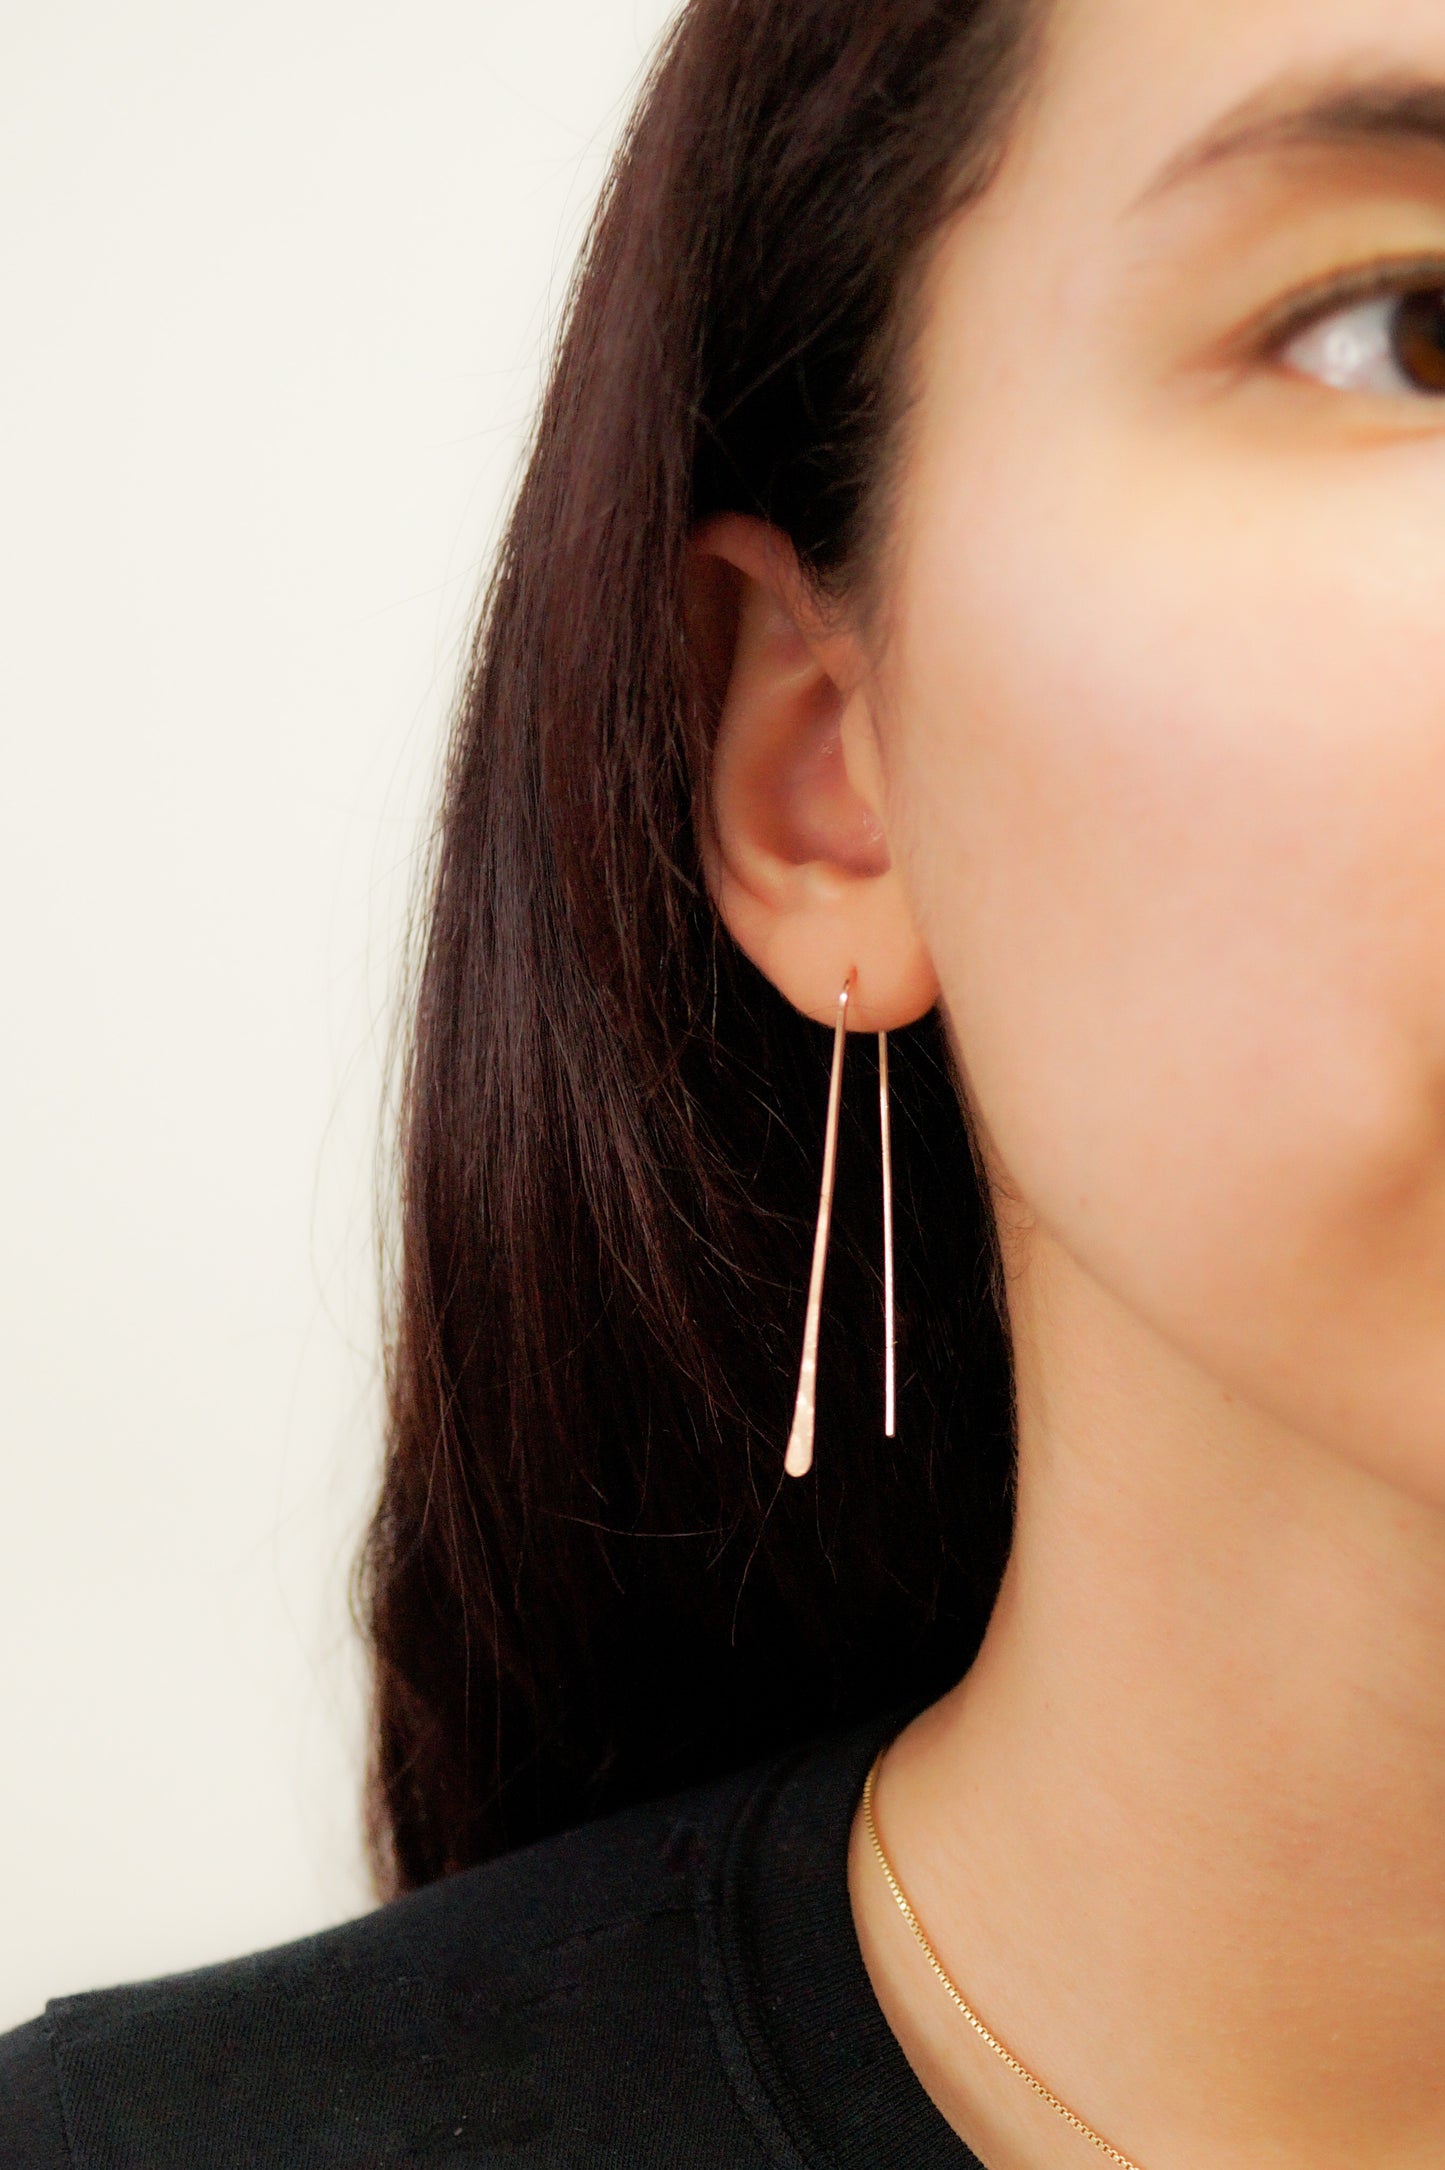 Long Arch Earrings, Gold Fill, Rose Gold Fill, or Sterling Silver